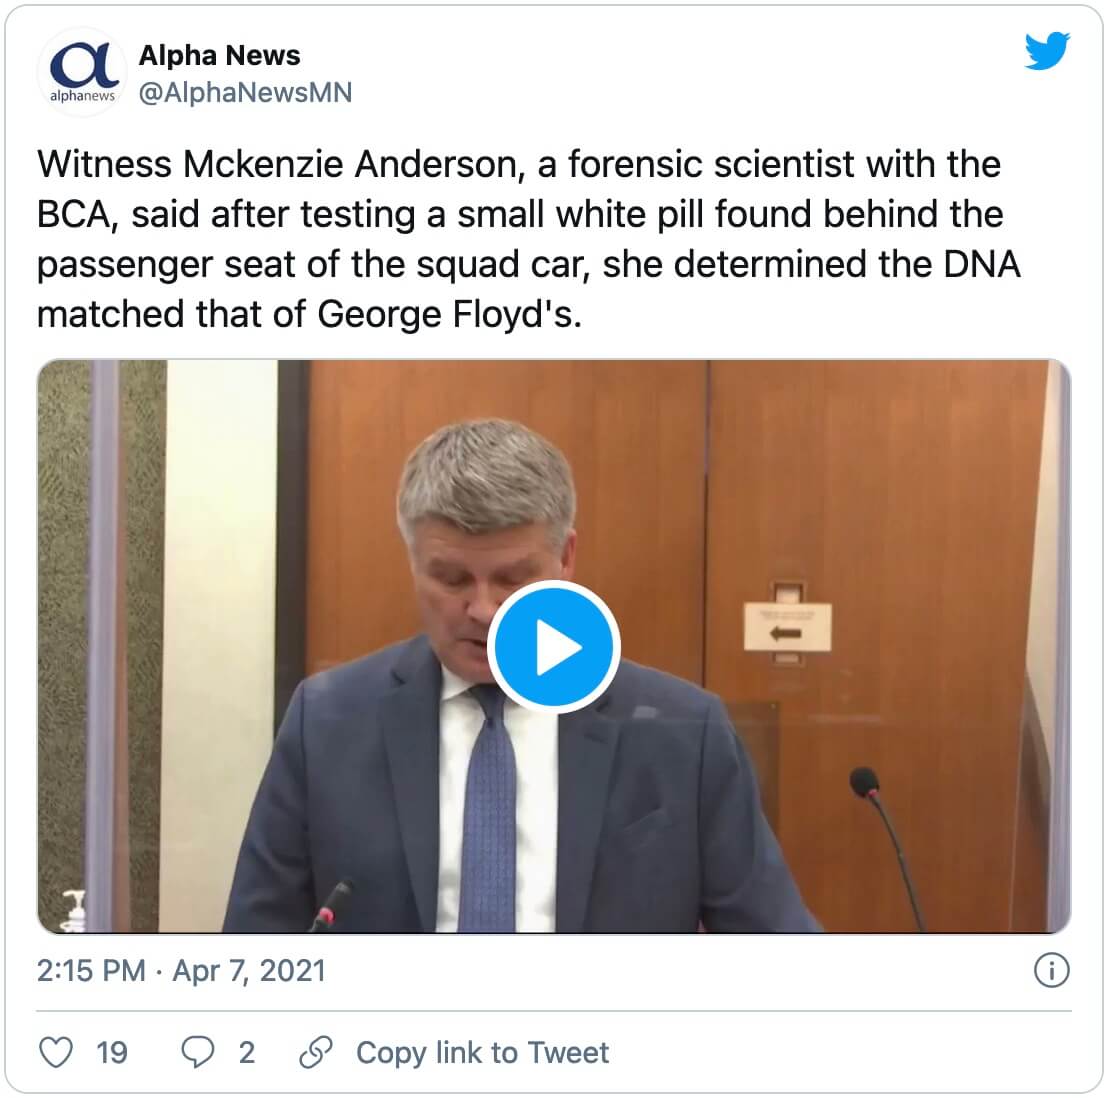 Witness Mckenzie Anderson, a forensic scientist with the BCA, said after testing a small white pill found behind the passenger seat of the squad car, she determined the DNA matched that of George Floyd's. pic.twitter.com/Nmef8oNtpS — Alpha News (@AlphaNewsMN) April 7, 2021